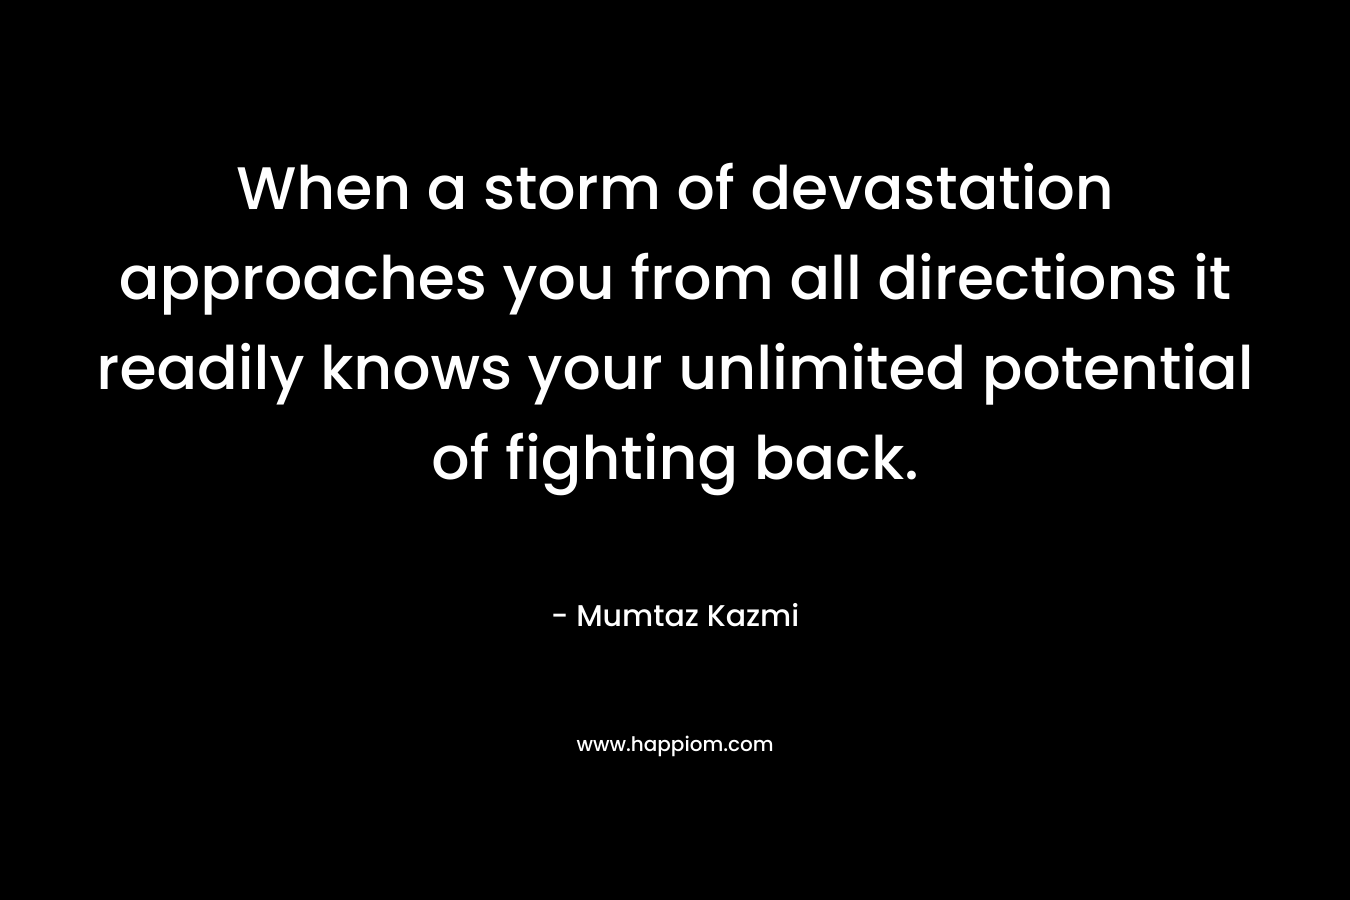 When a storm of devastation approaches you from all directions it readily knows your unlimited potential of fighting back. – Mumtaz Kazmi